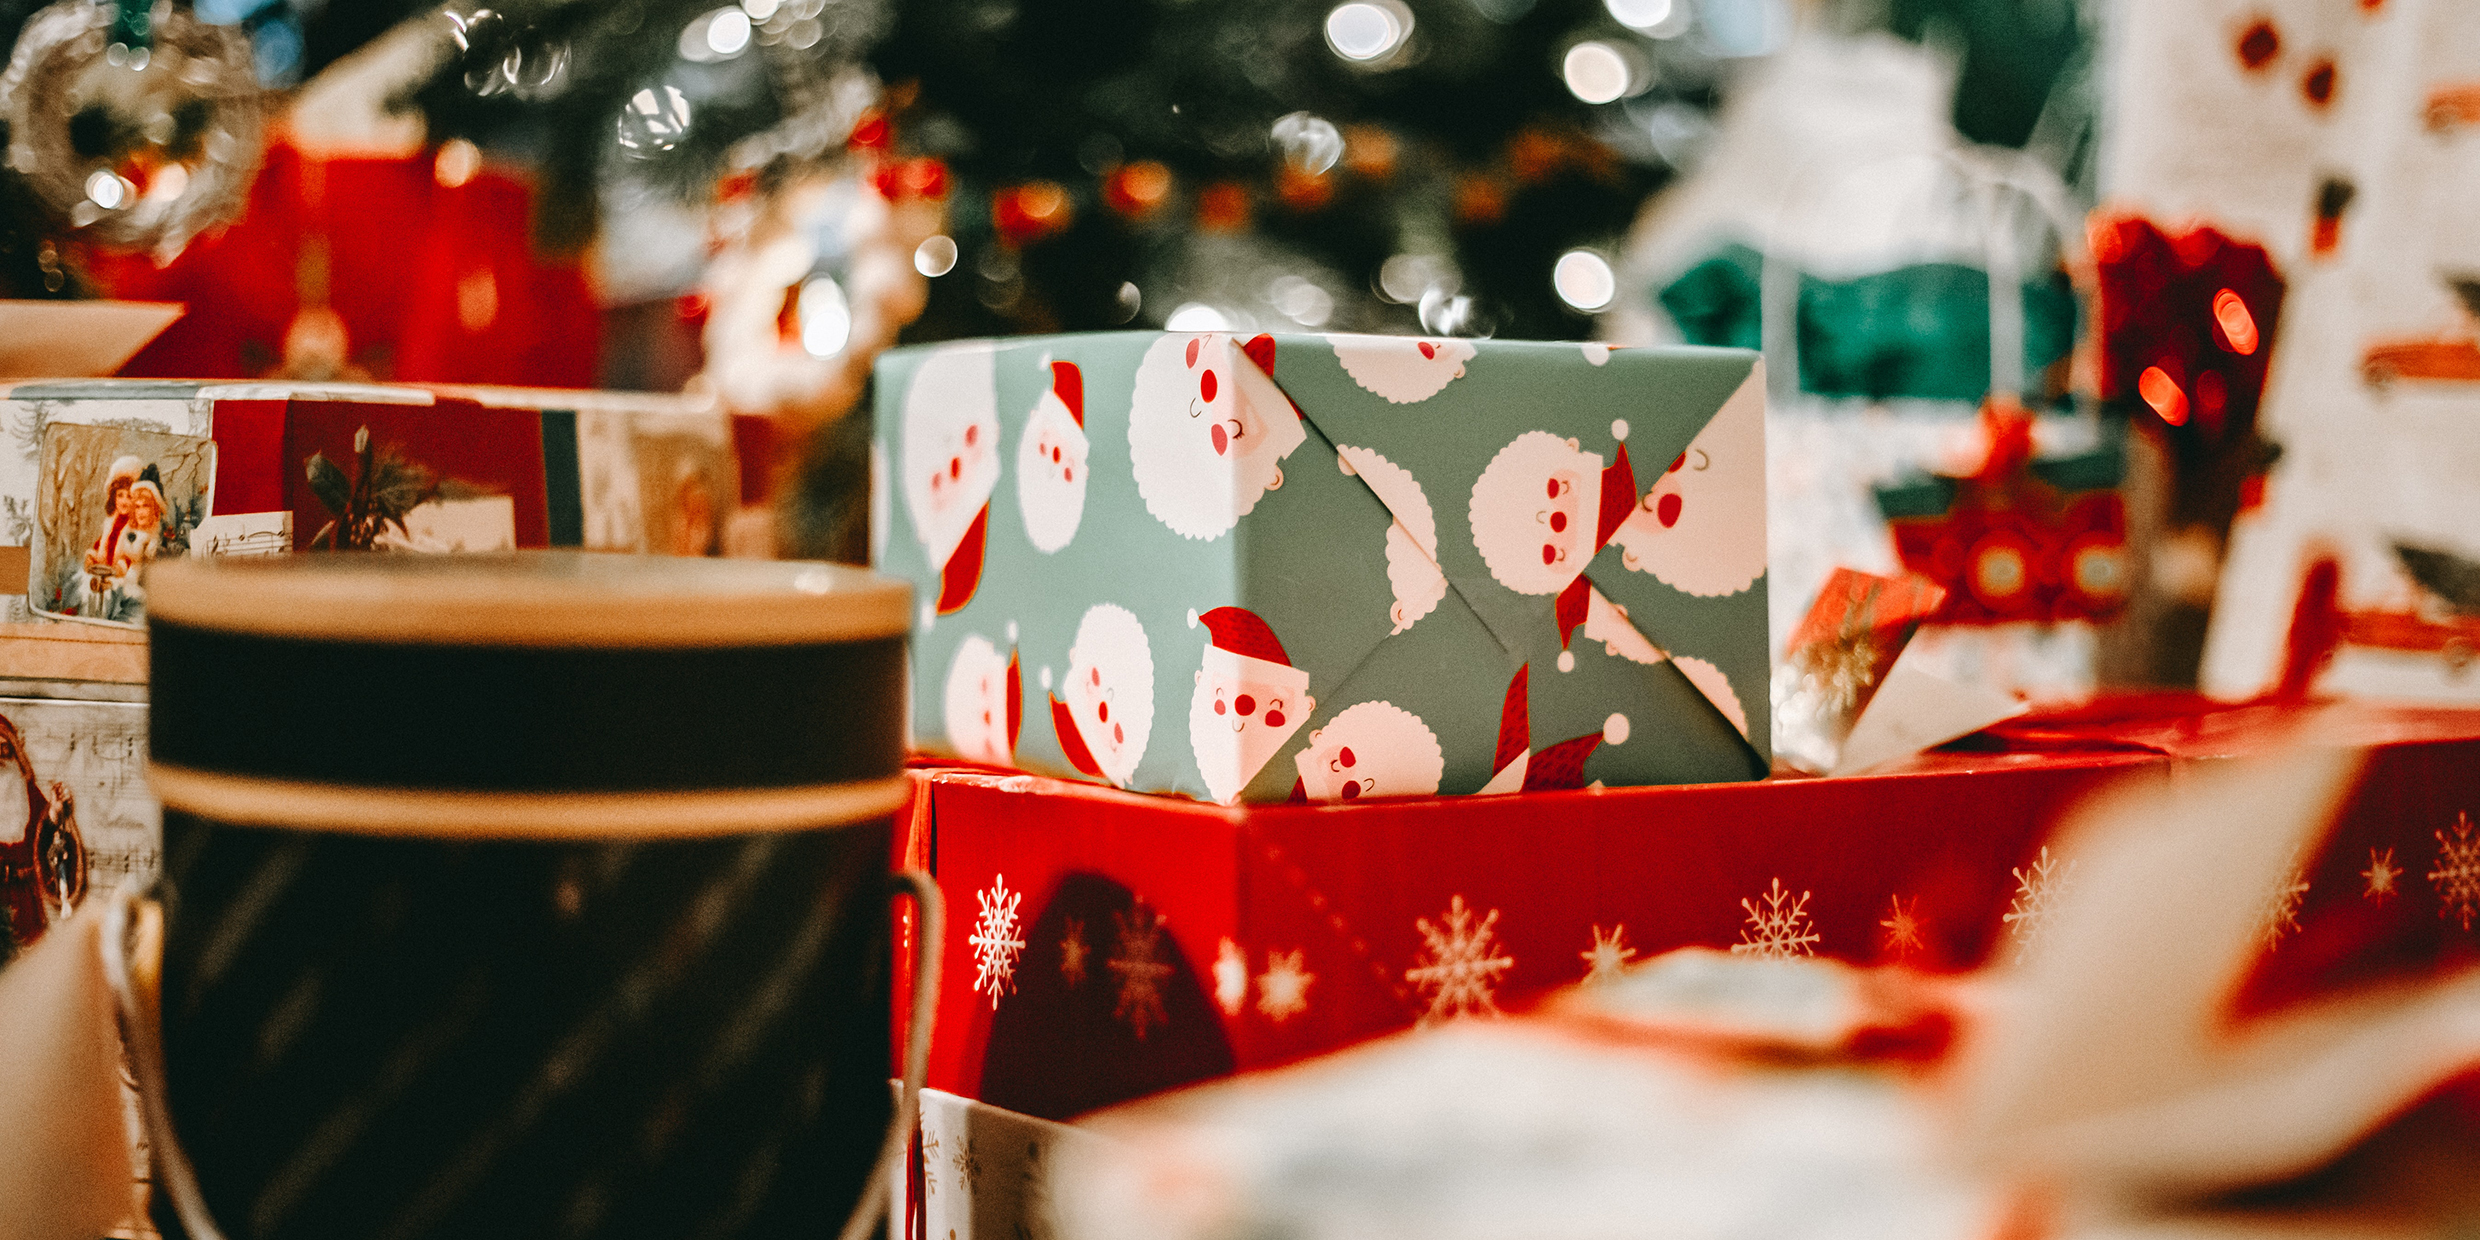 Image of an assortment of wrapped gifts under a Christmas tree